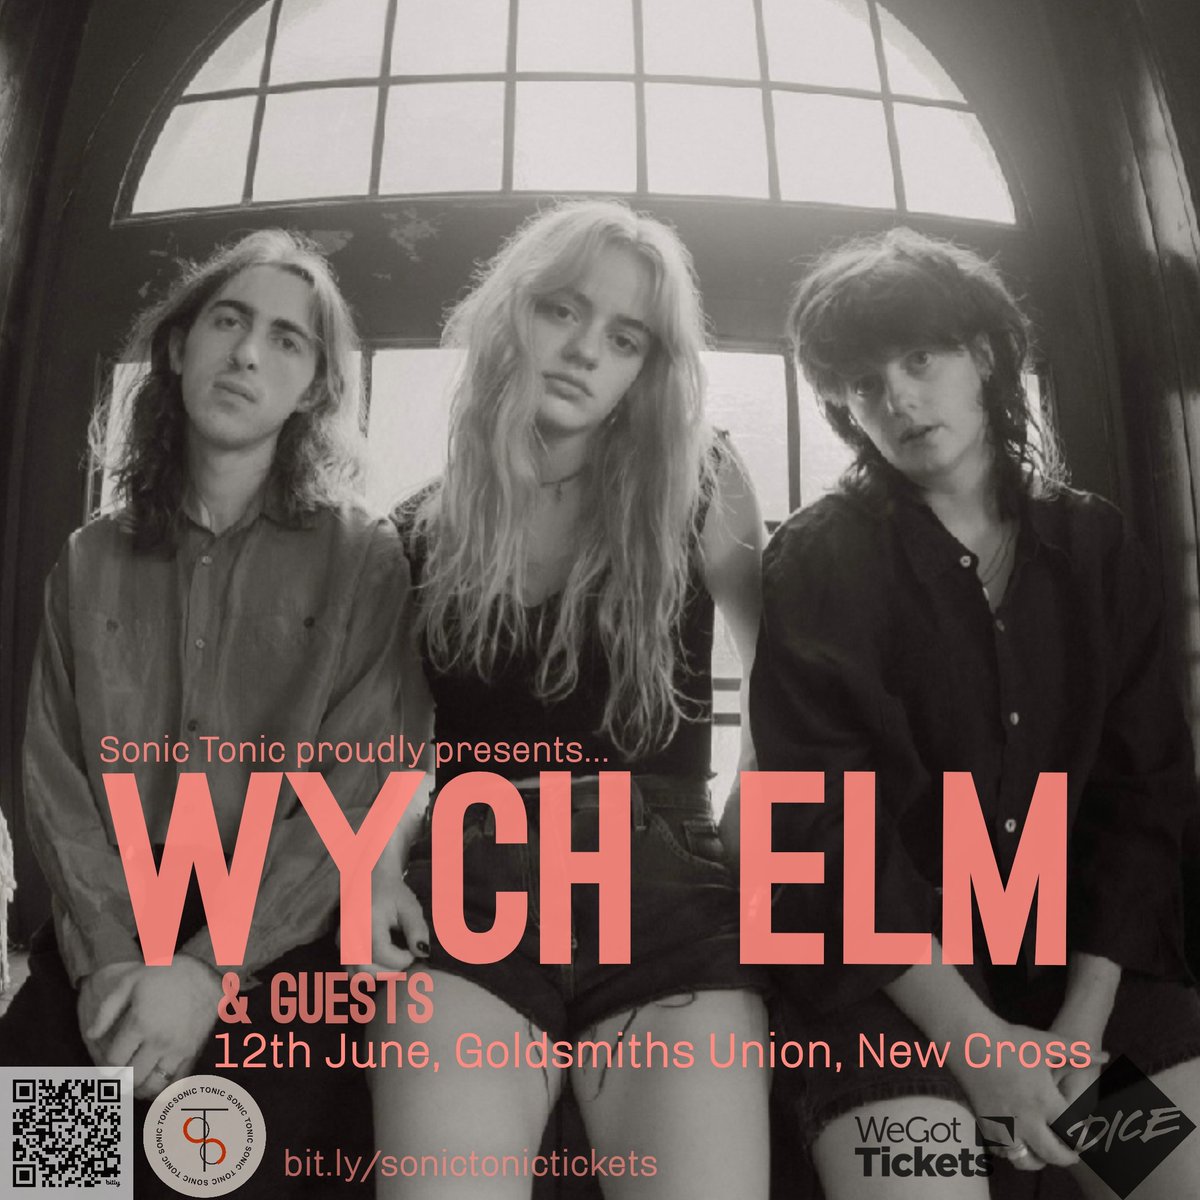 💥 Pleased to announce Wych Elm at Goldsmiths, 12th June! Tickets on sale now on Dice & WeGotTickets